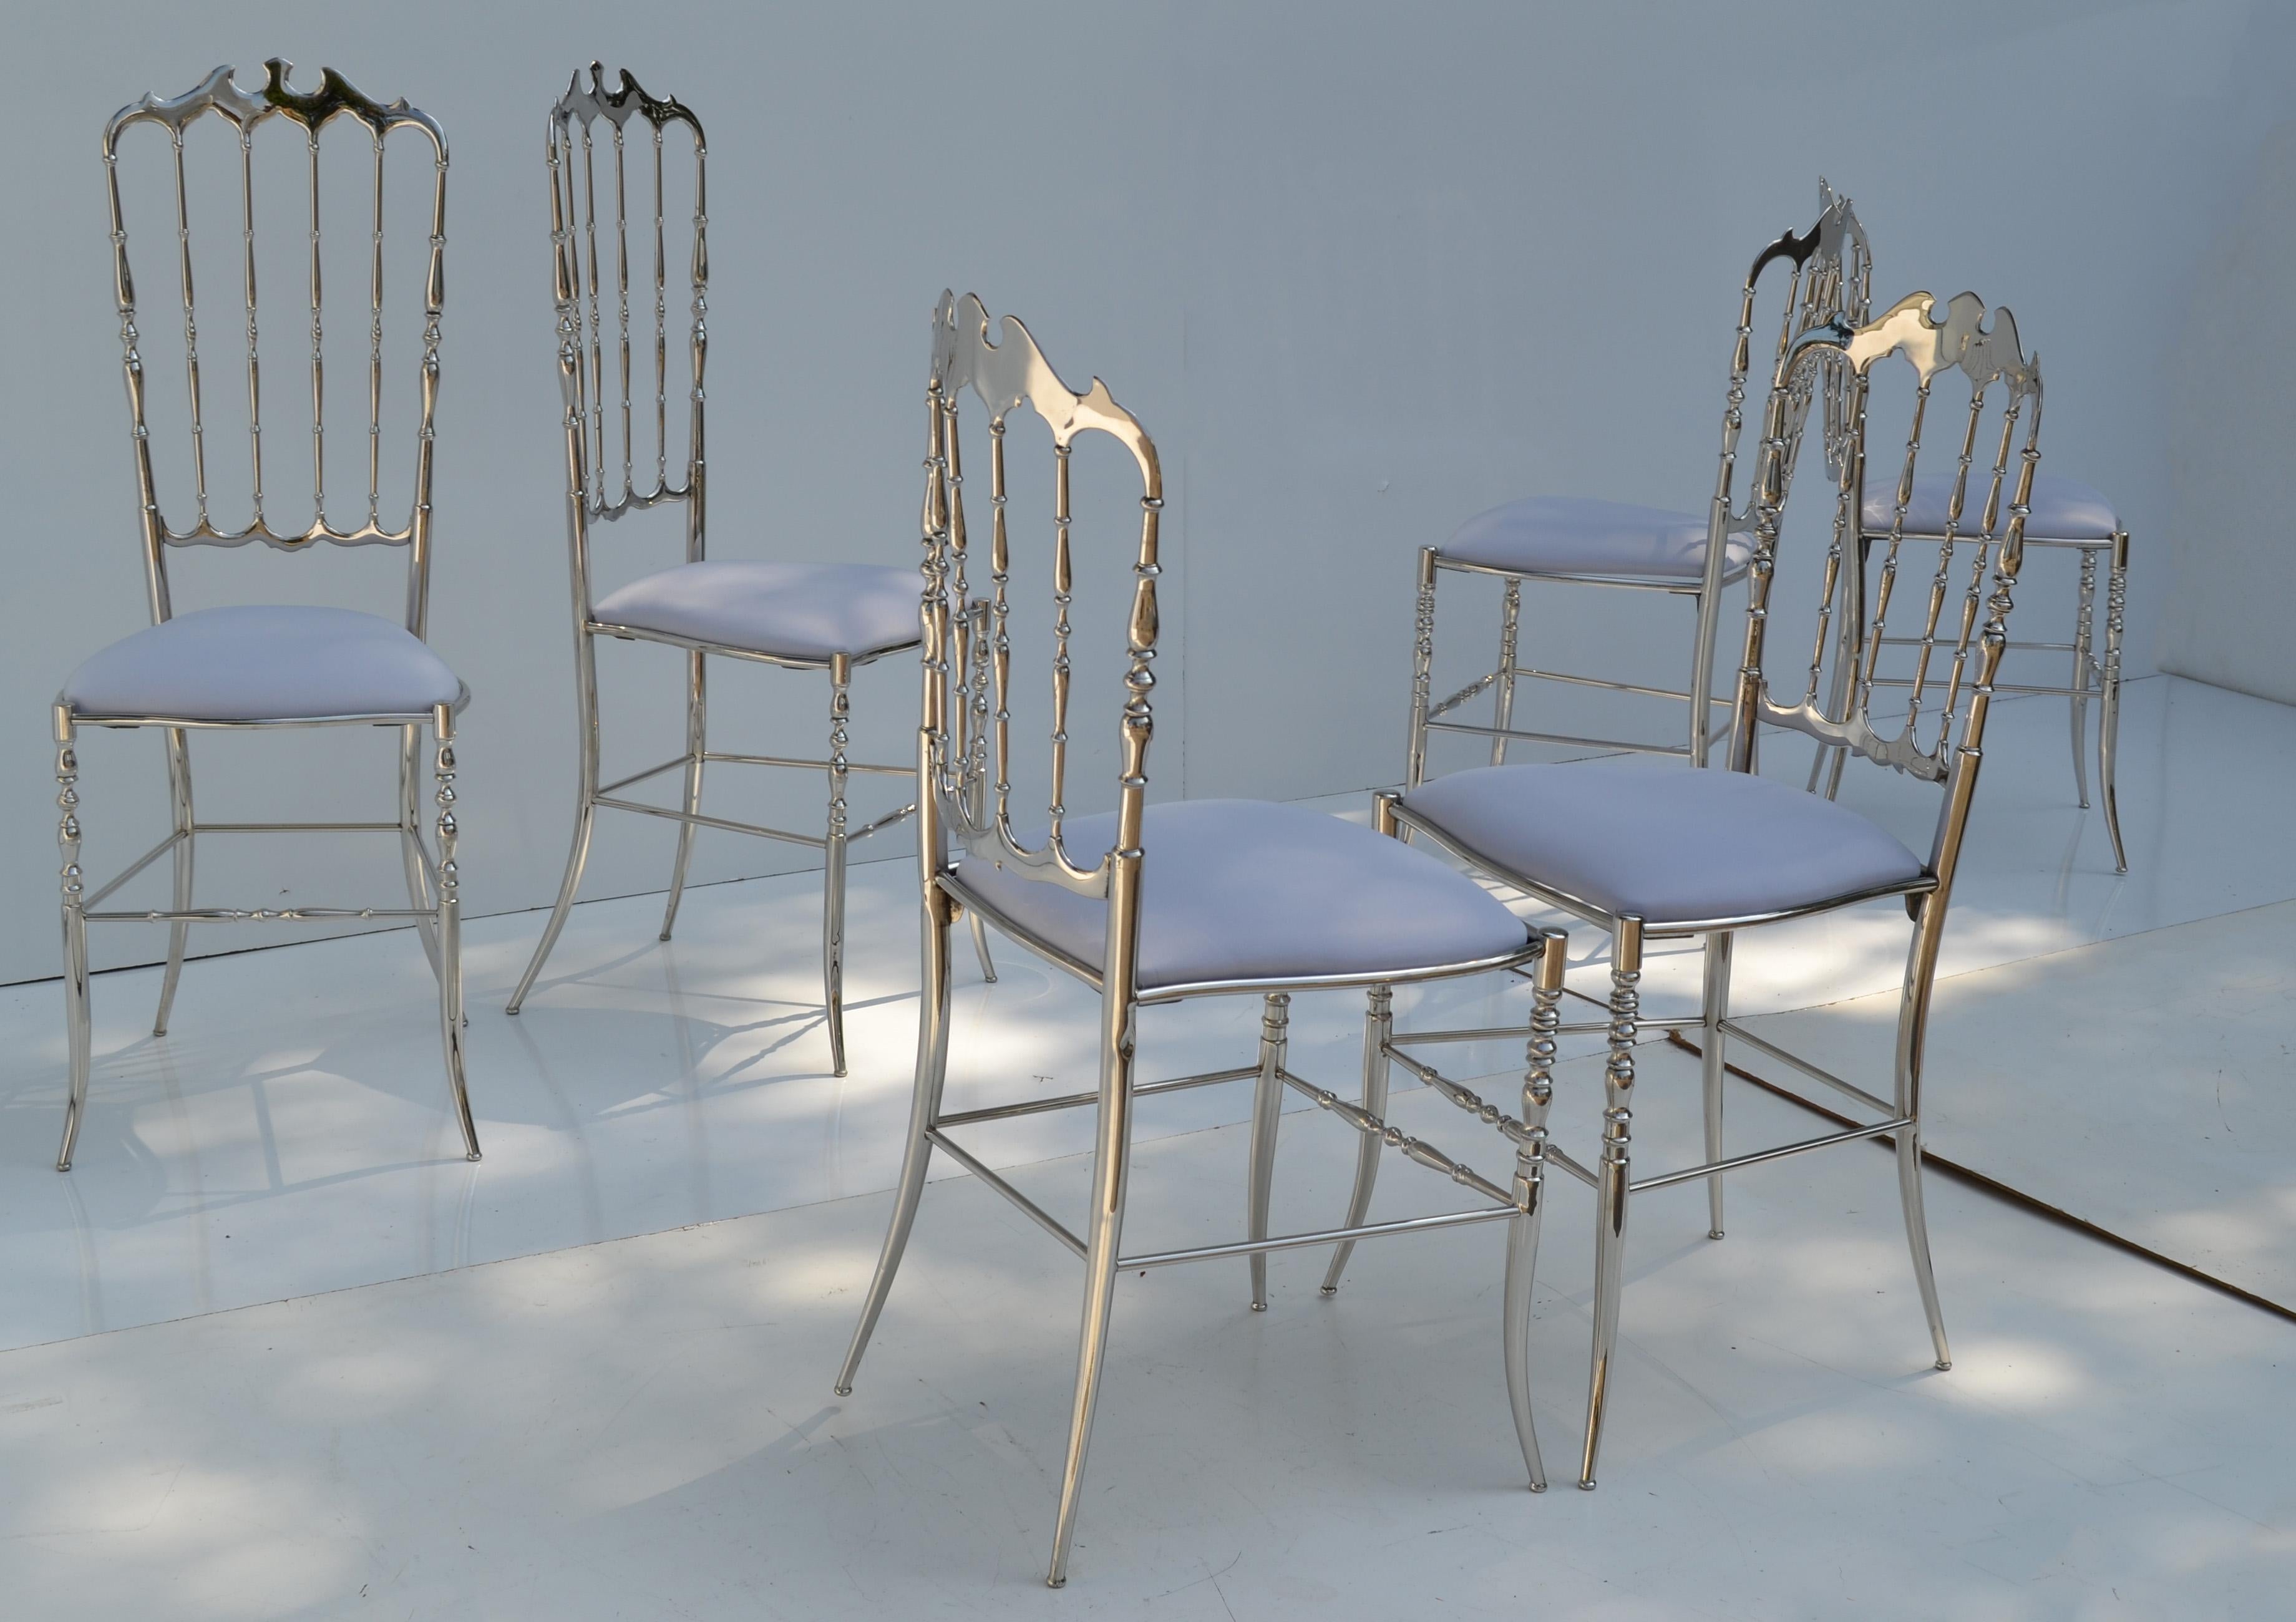 Maison Baccarat Crystal Room Restaurant Style Set of 6 Nickel Plated Chair 7